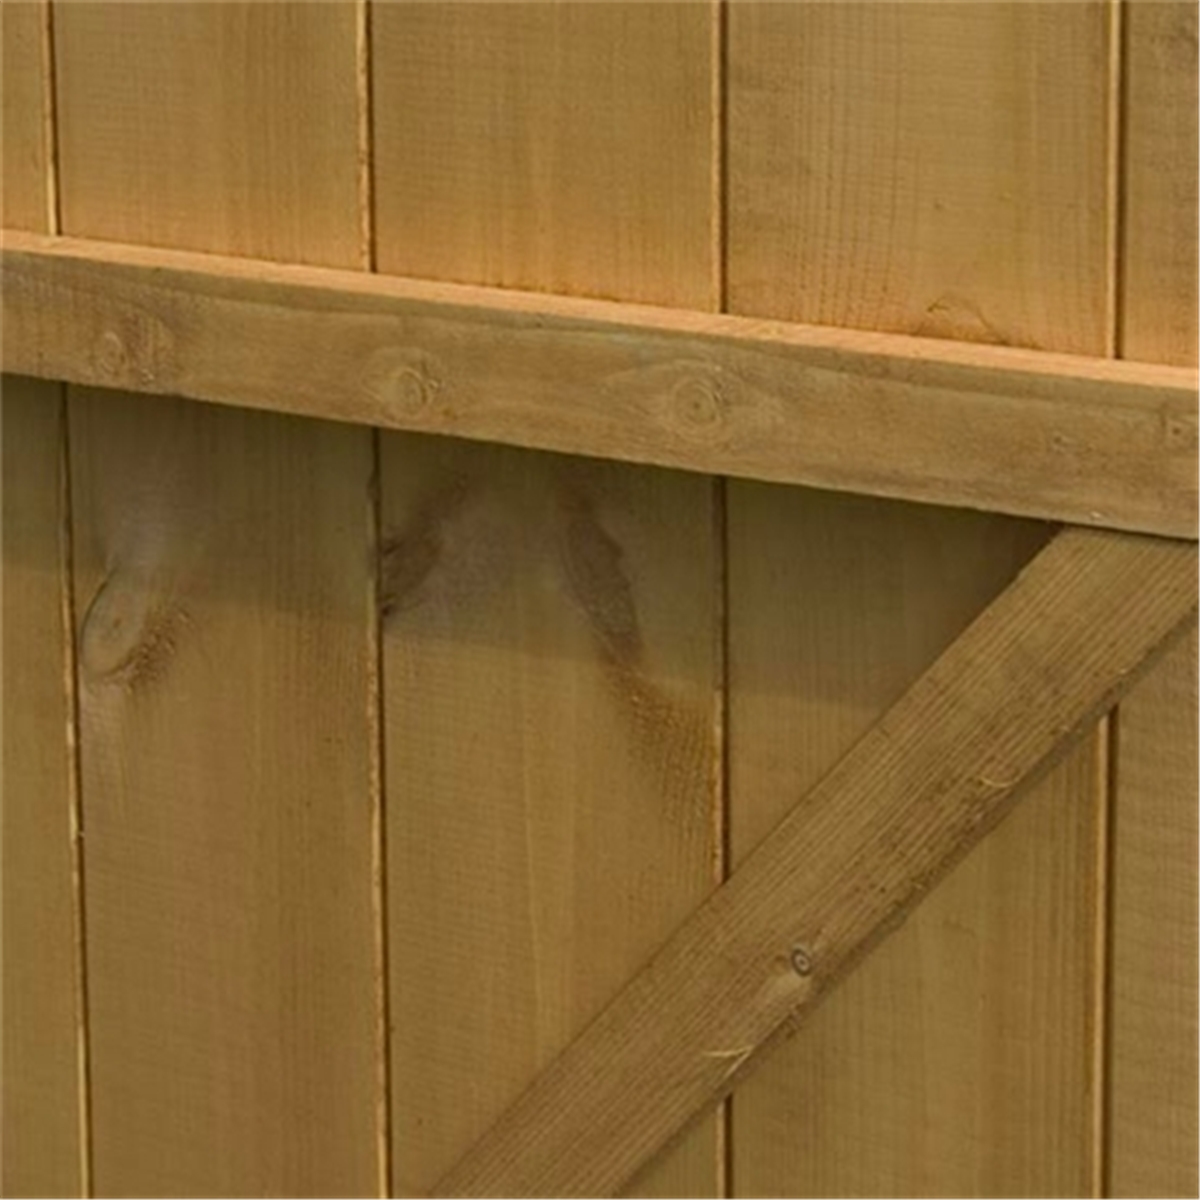 6 x 3 Tongue and Groove Tall Pent Shed *No Front Doors 